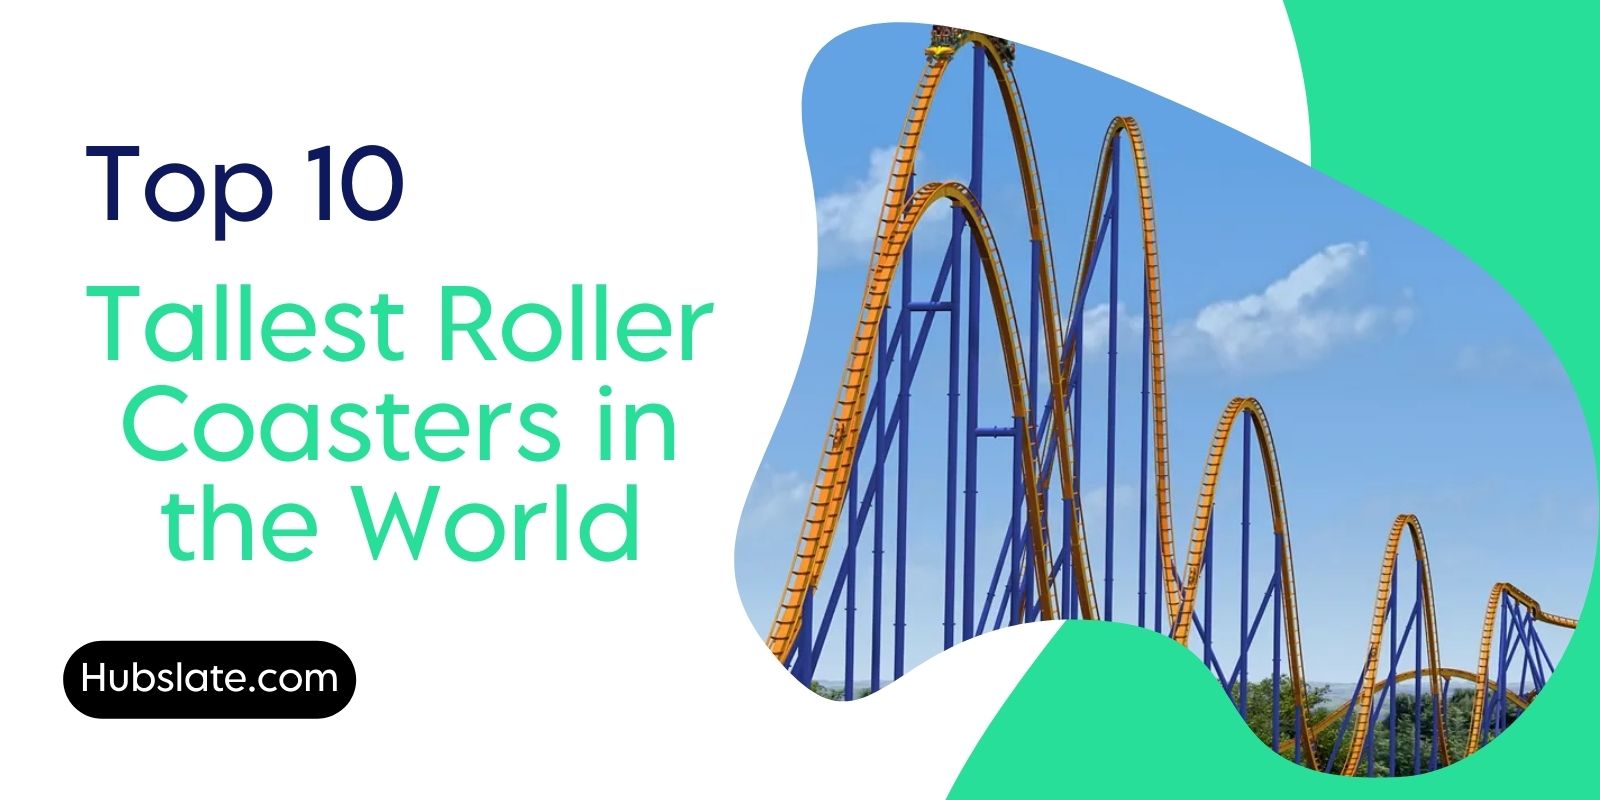 Tallest Roller Coasters in the World